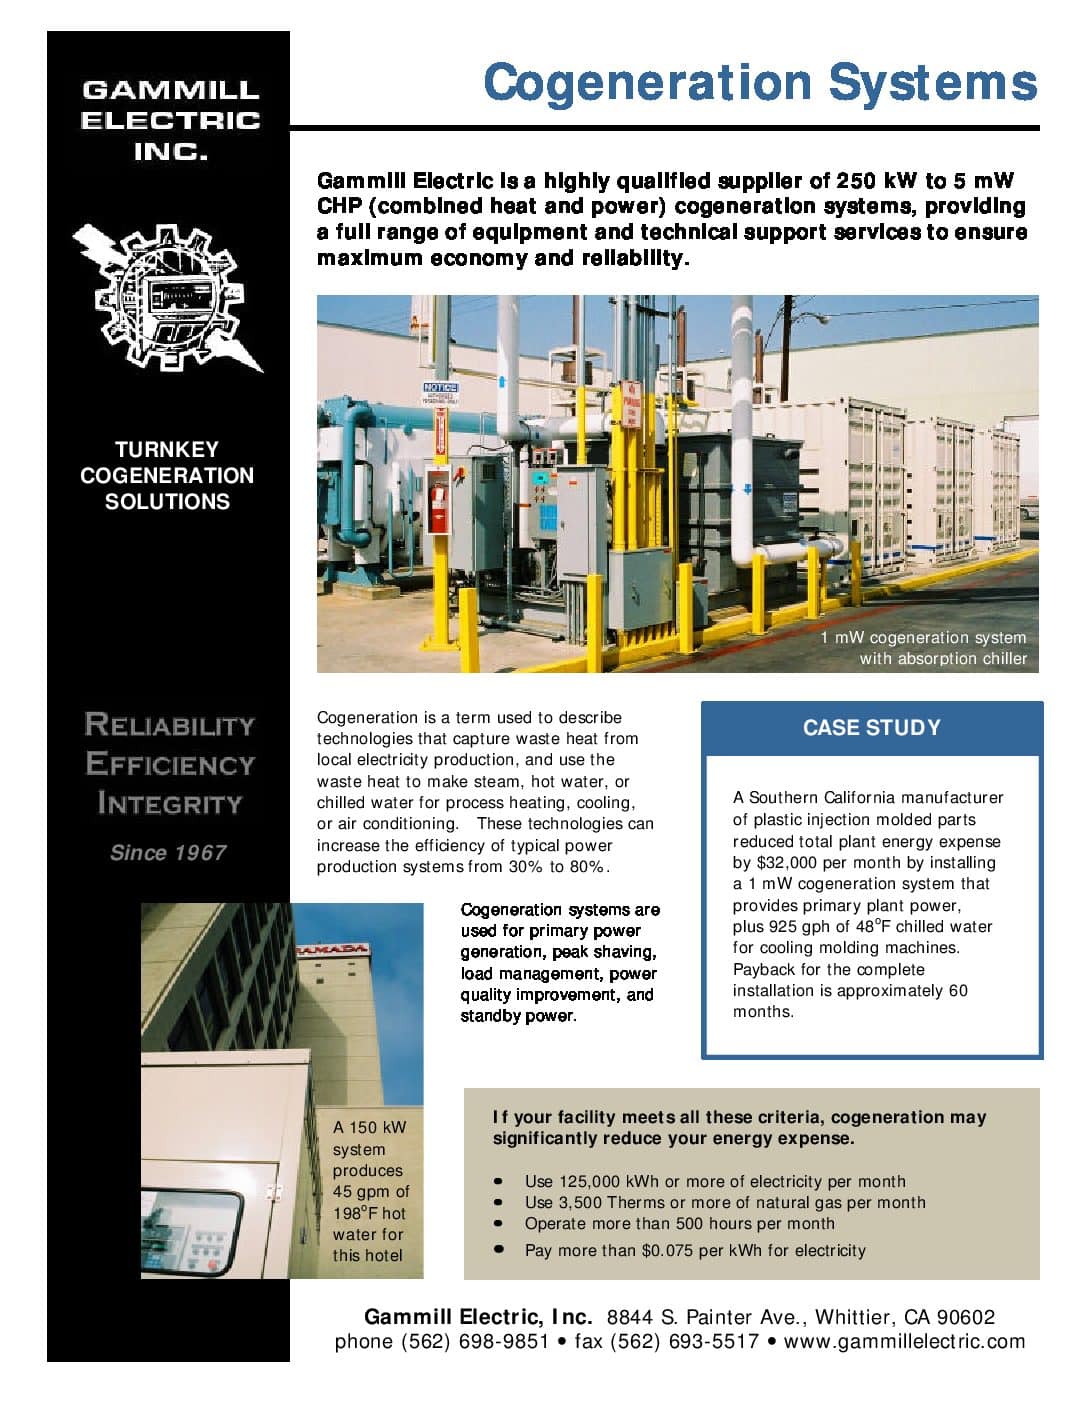 CHP Cogeneration Systems - Gammill Electric